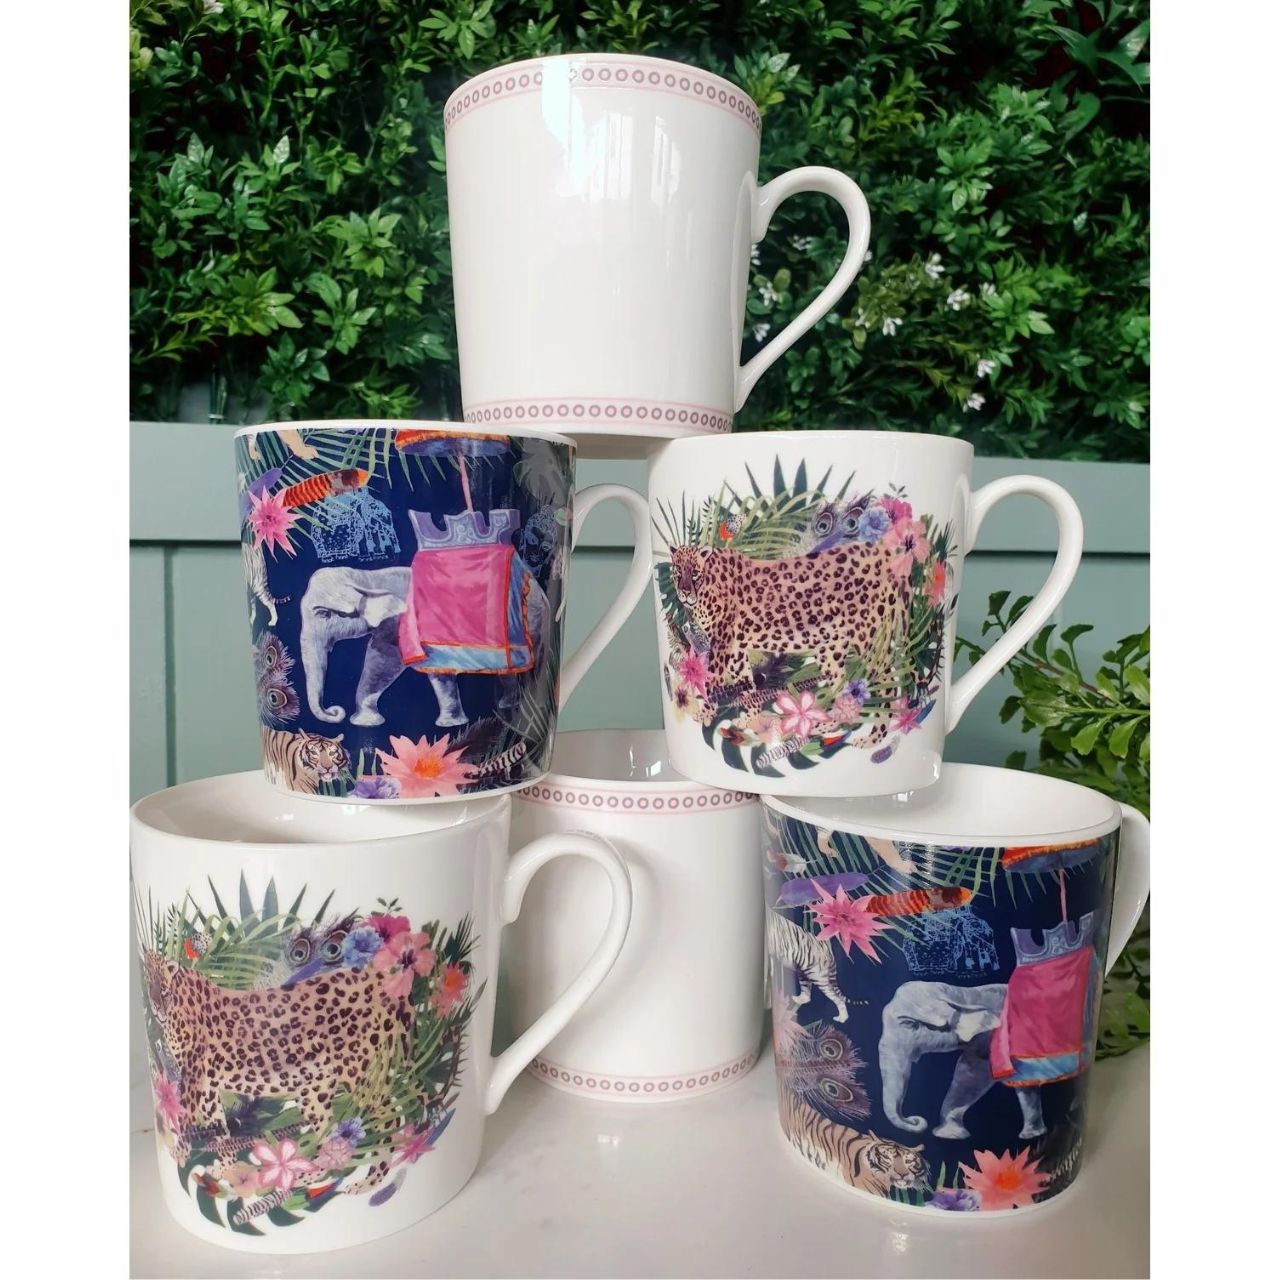 Jungle Frenzie Cups Set of 6 by Mindy Brownes  - This set of 6 Mindy Brownes Cups is the perfect gift for any special occasion or a gorgeous addition to your own home!